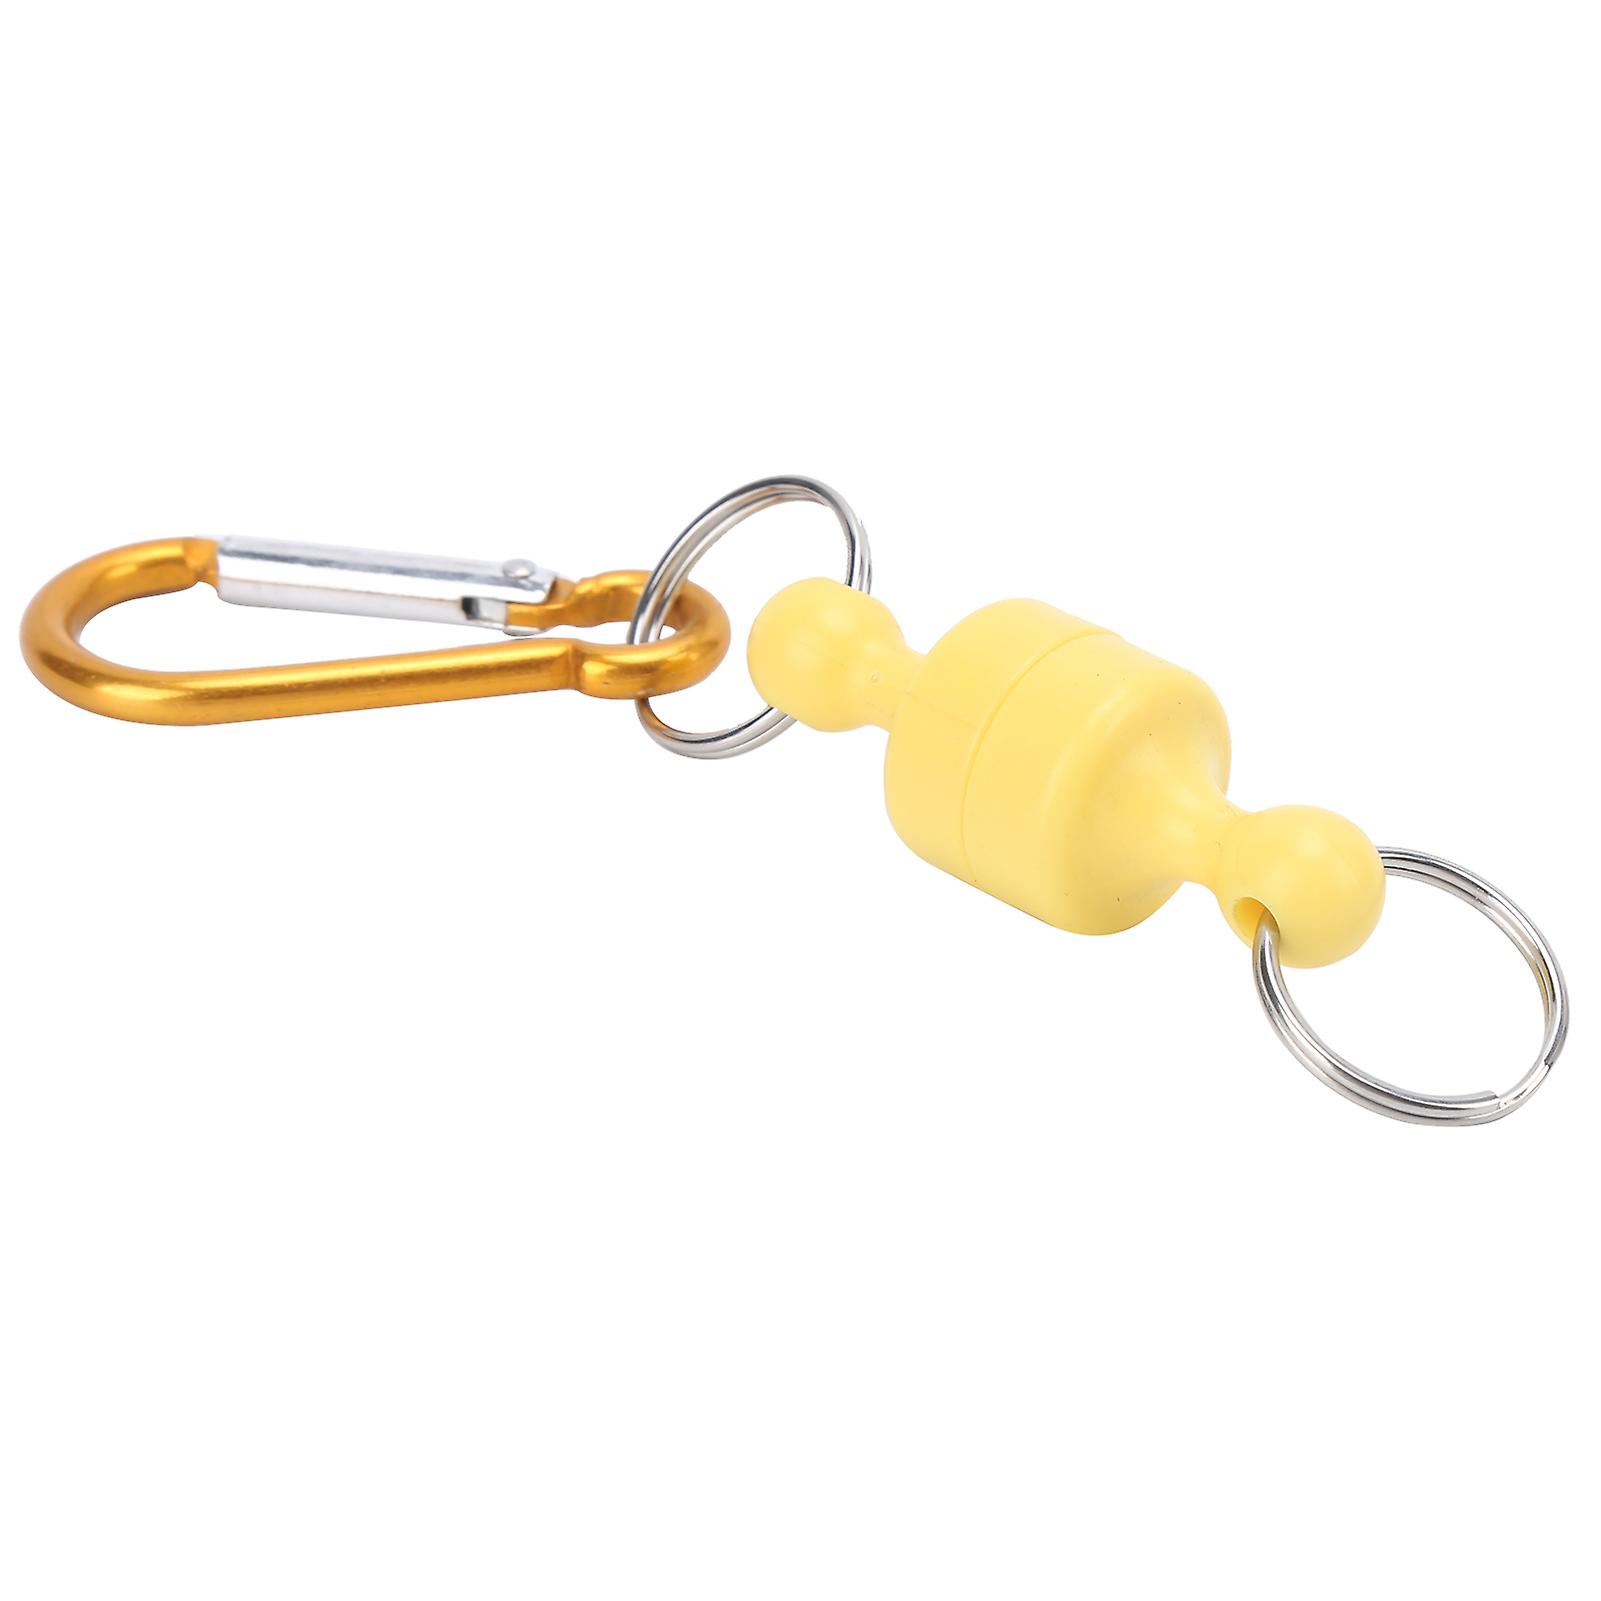 Strong Magnetic Release Holder Carabiner Aluminium Net Release Clip Keychain For Outdoors